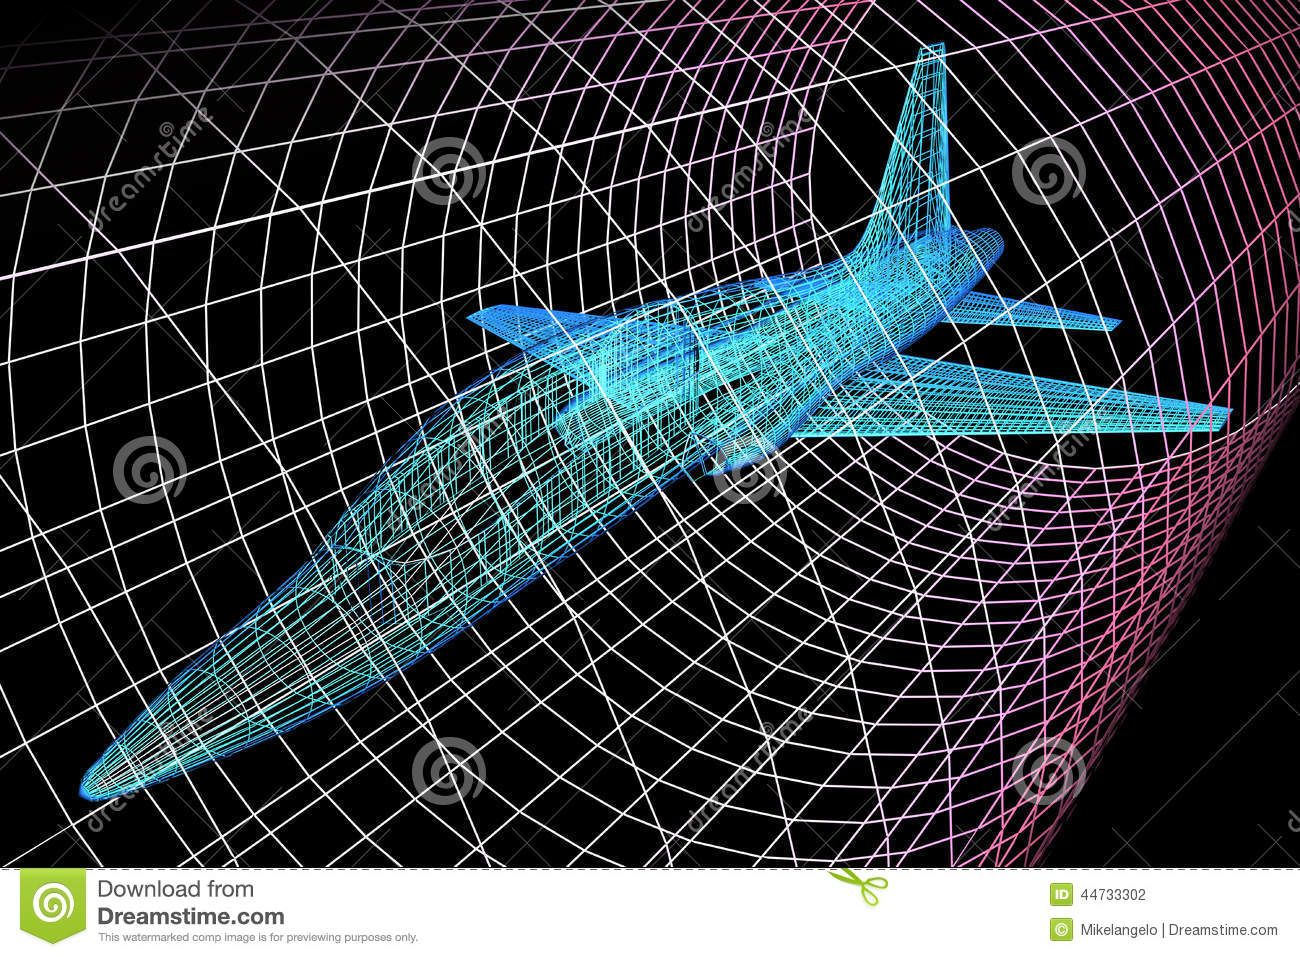 Virtual Wind Tunnel software, free download